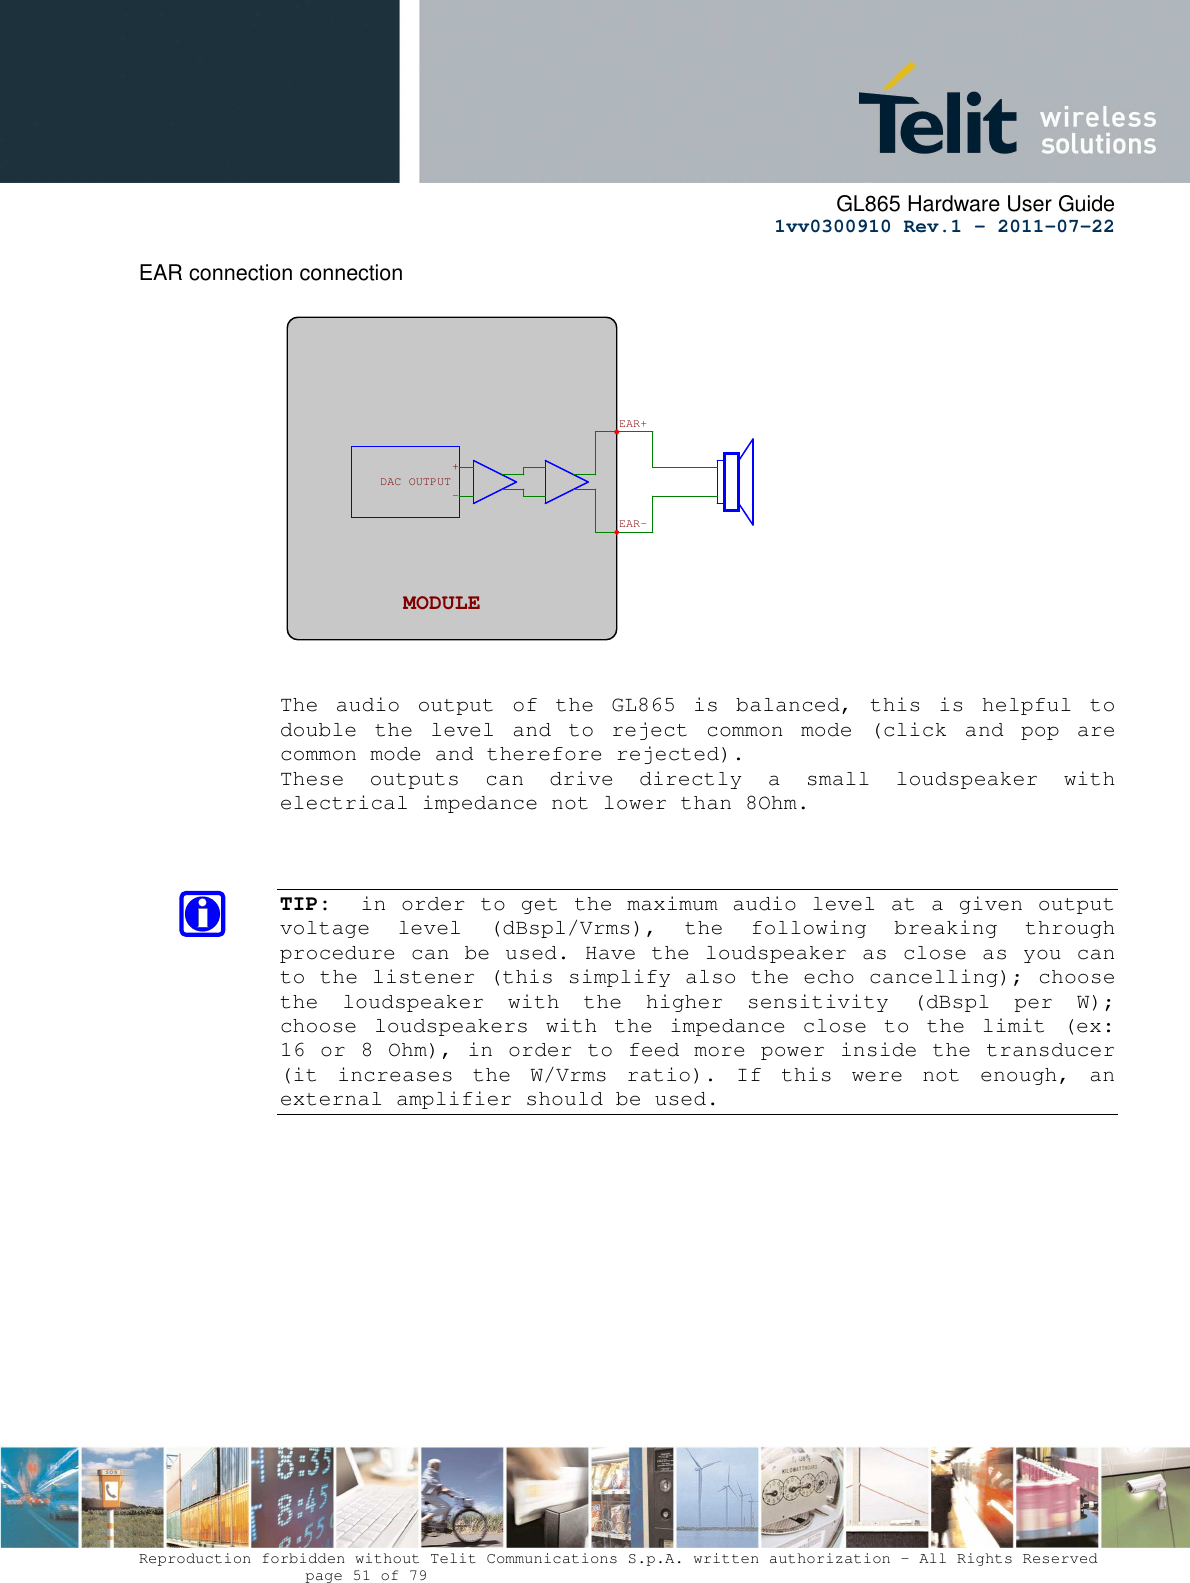      GL865 Hardware User Guide     1vv0300910 Rev.1 – 2011-07-22       Reproduction forbidden without Telit Communications S.p.A. written authorization - All Rights Reserved    page 51 of 79  EAR connection connection    The  audio  output  of  the  GL865  is  balanced,  this  is  helpful  to double  the  level  and  to  reject  common  mode  (click  and  pop  are common mode and therefore rejected). These  outputs  can  drive  directly  a  small  loudspeaker  with electrical impedance not lower than 8Ohm.    TIP:  in order to get the maximum audio level at a given output voltage  level  (dBspl/Vrms),  the  following  breaking  through procedure can be used. Have the loudspeaker as close as you can to the listener (this simplify also the echo cancelling); choose the  loudspeaker  with  the  higher  sensitivity  (dBspl  per  W); choose  loudspeakers  with  the  impedance  close  to  the  limit  (ex: 16 or 8 Ohm), in order to feed more power inside the transducer (it  increases  the  W/Vrms  ratio).  If  this  were  not  enough,  an external amplifier should be used.           EAR+EAR-MODULE  -+OUTPUT DAC